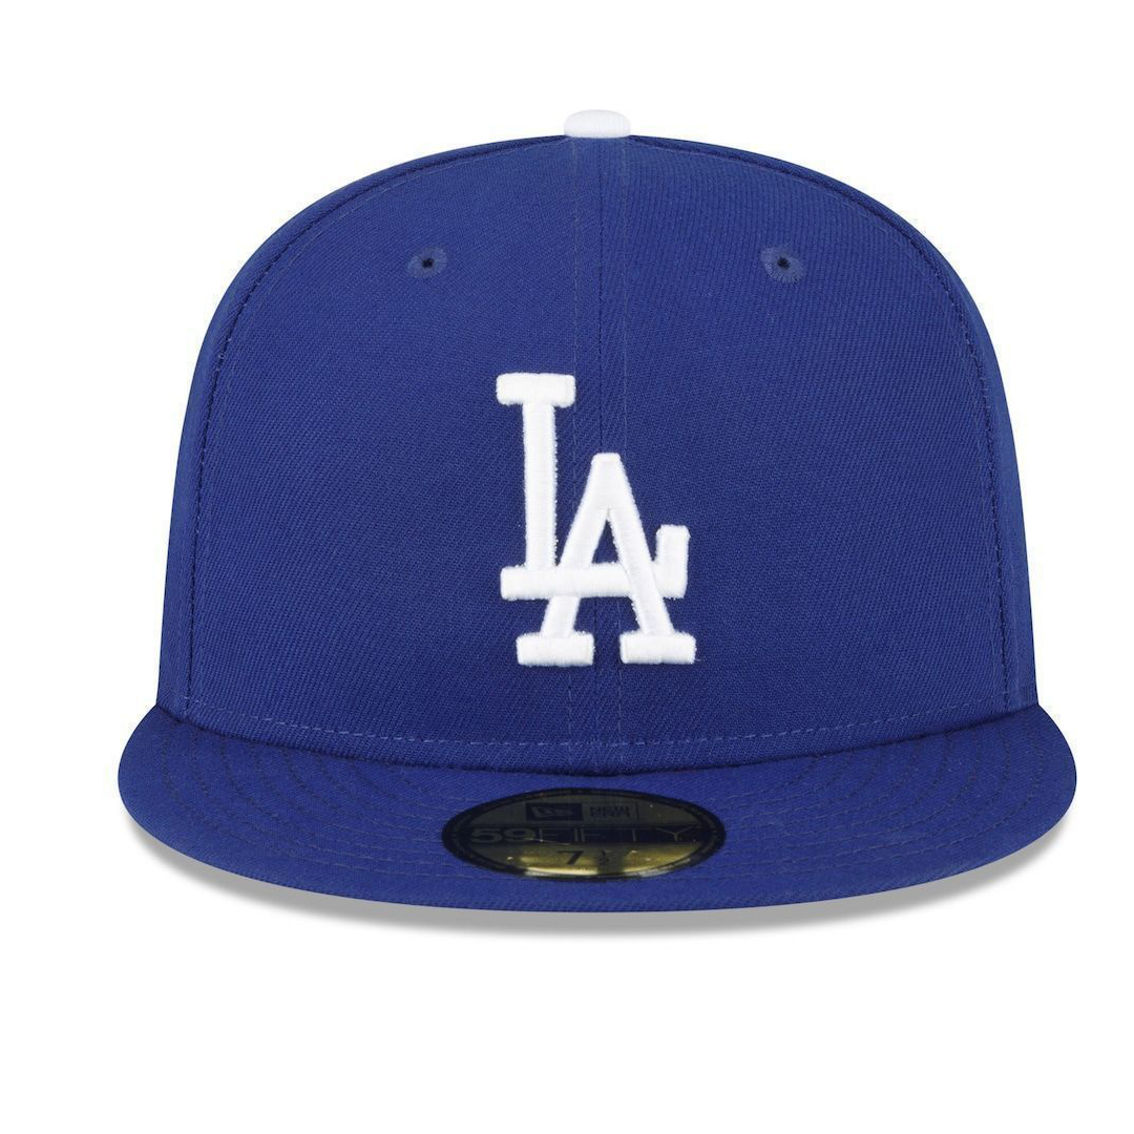 New Era Men's Royal Los Angeles Dodgers Authentic Collection Replica 59FIFTY Fitted Hat - Image 3 of 4